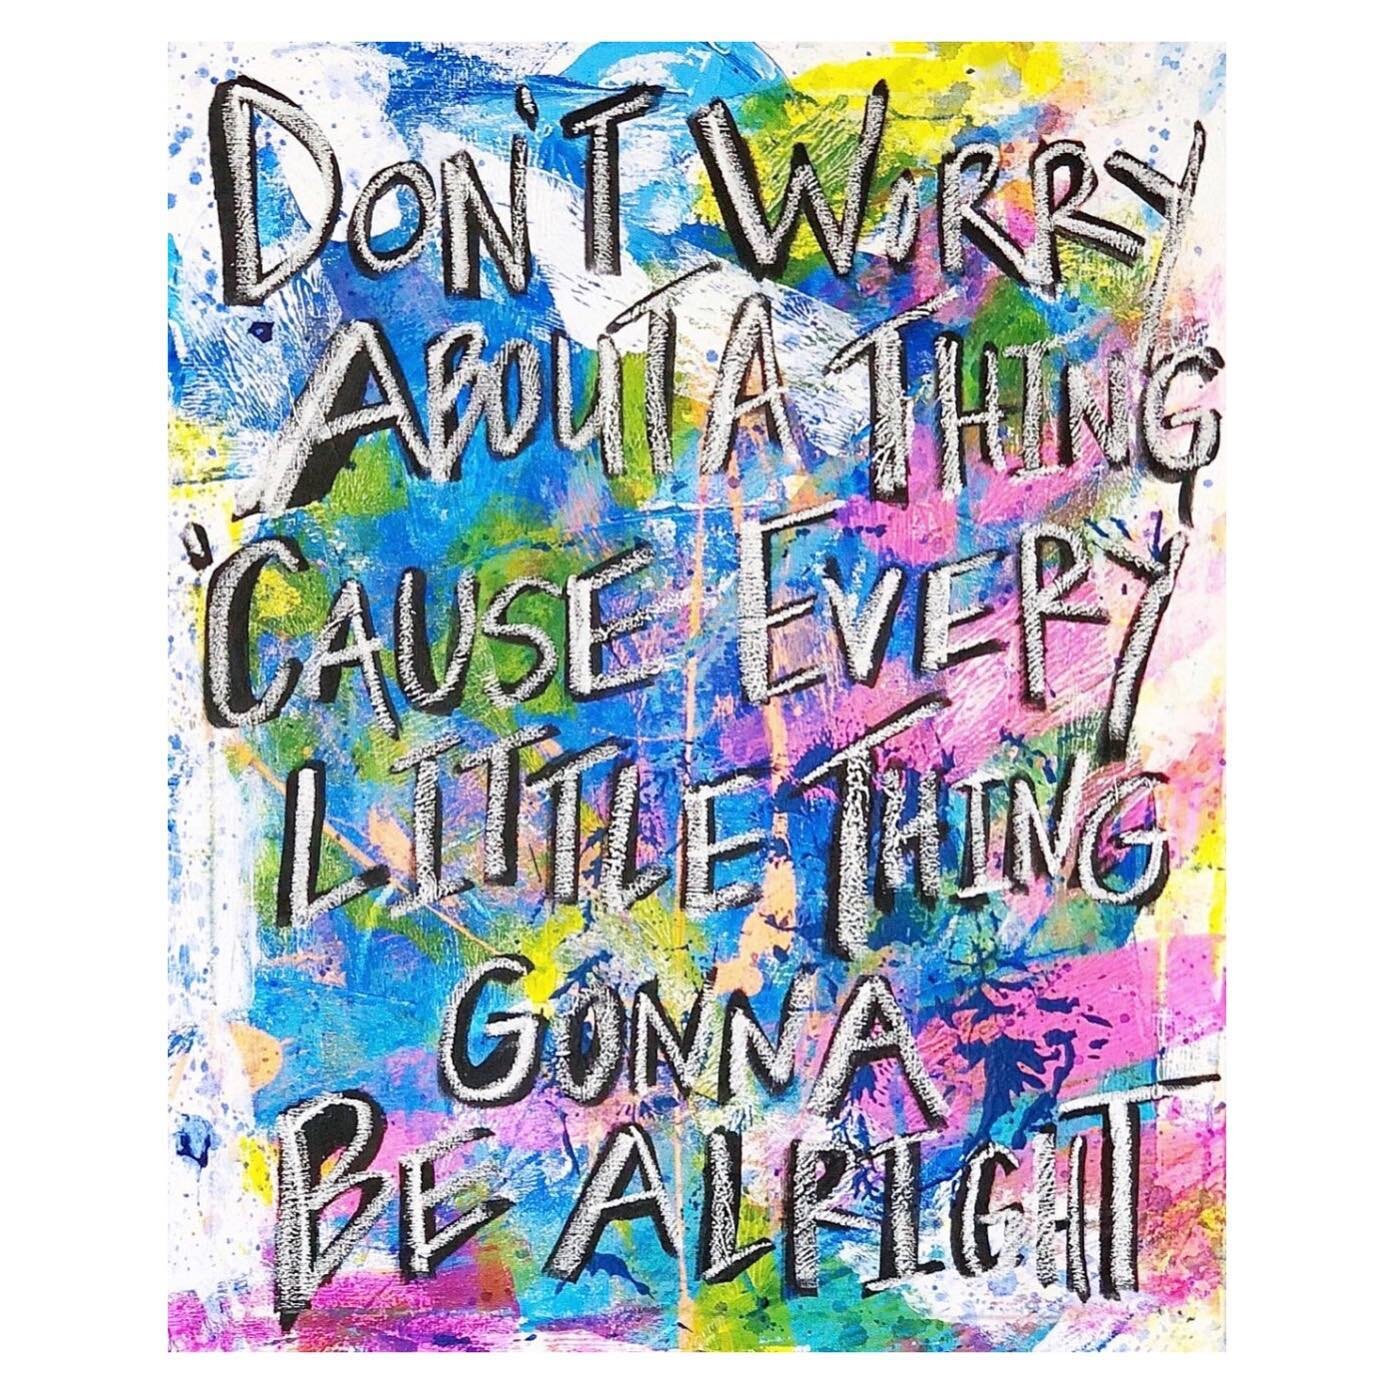 Every little thing is gonna be alright. ✨

Making progress on the website! This mixed media work is now available as a fine art print on my website. Shoot me a DM if you would like it framed.